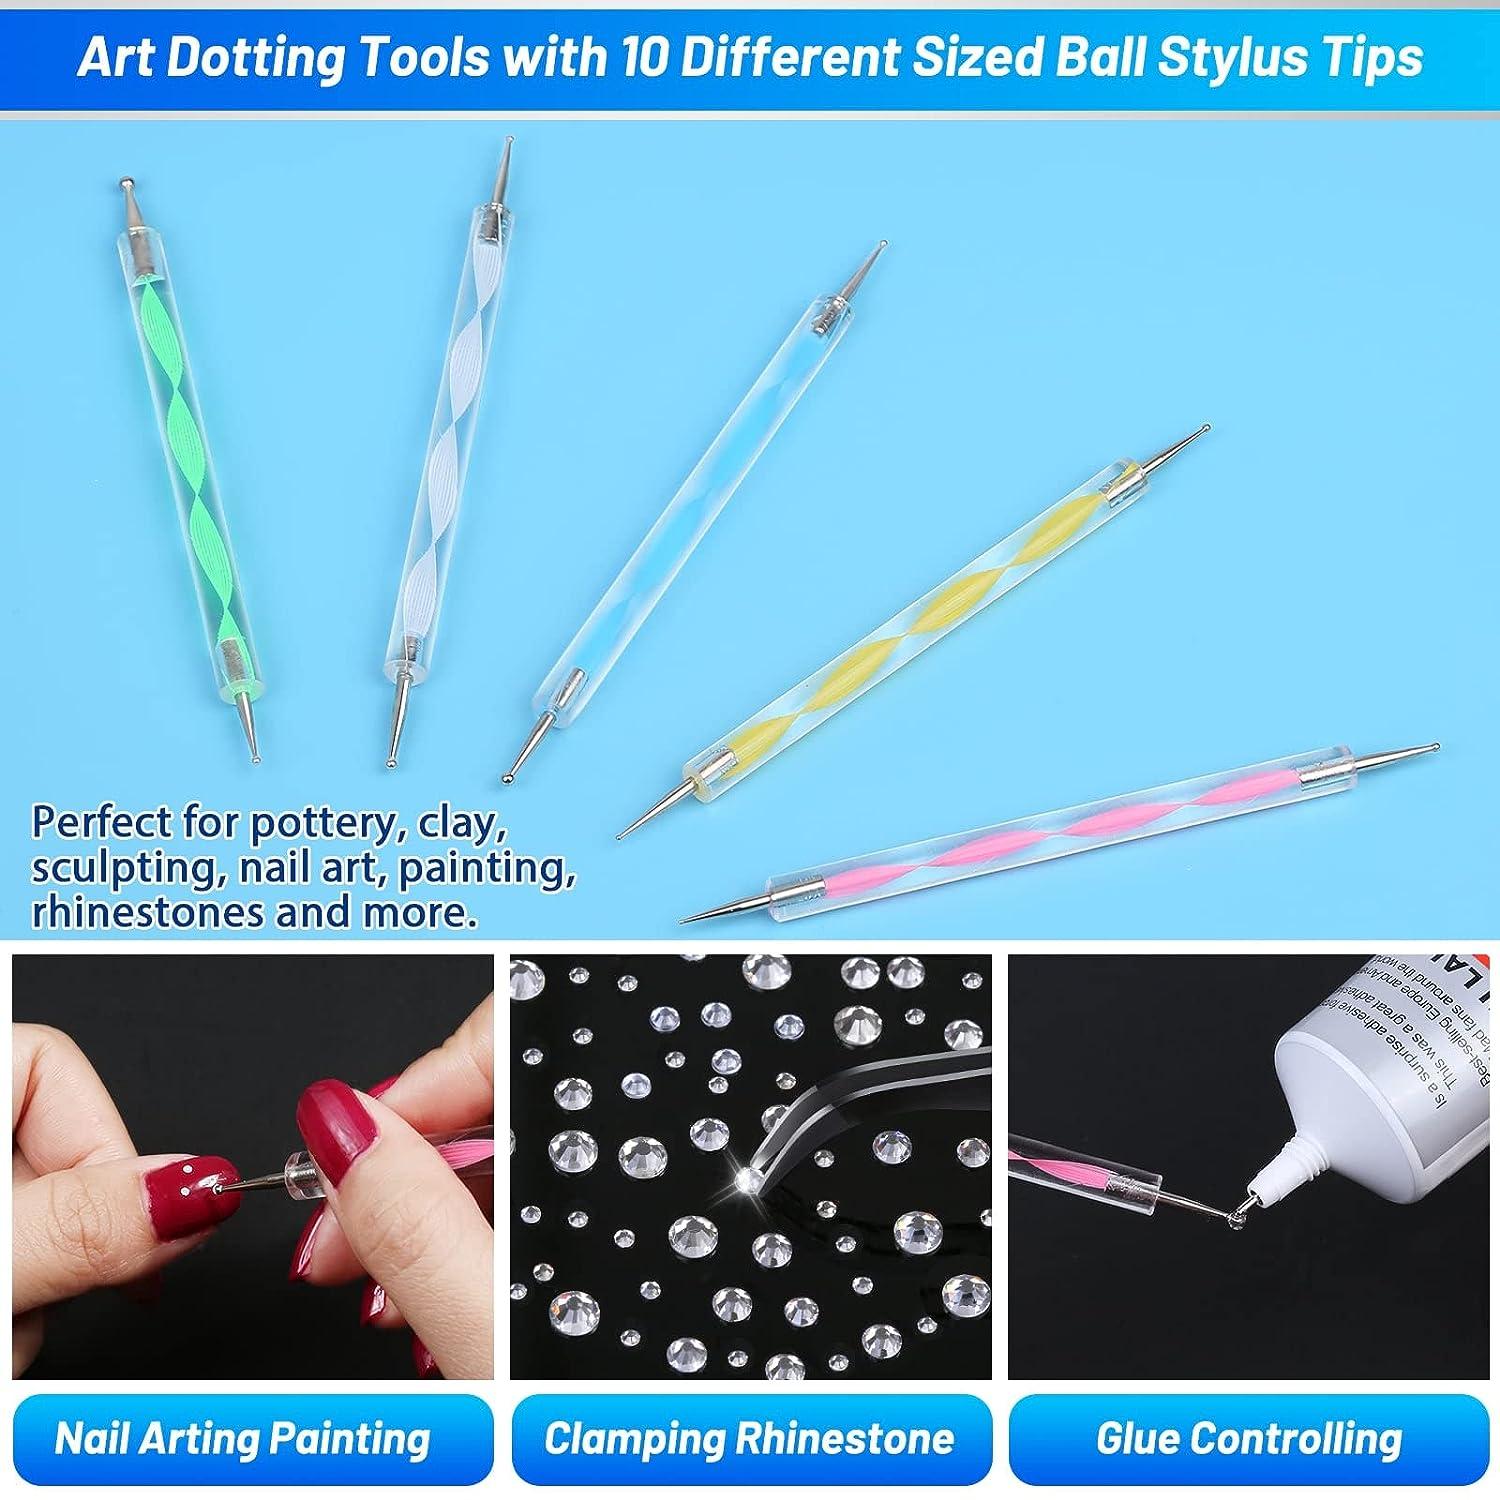 B7000 Glue Clear for Rhinestones, Cridoz Jewelry Glue Crafts Adhesive  Fabric Glue with Precision Tips Dotting Stylus and Tweezers for Nail Art,  Glasses, Metal a…